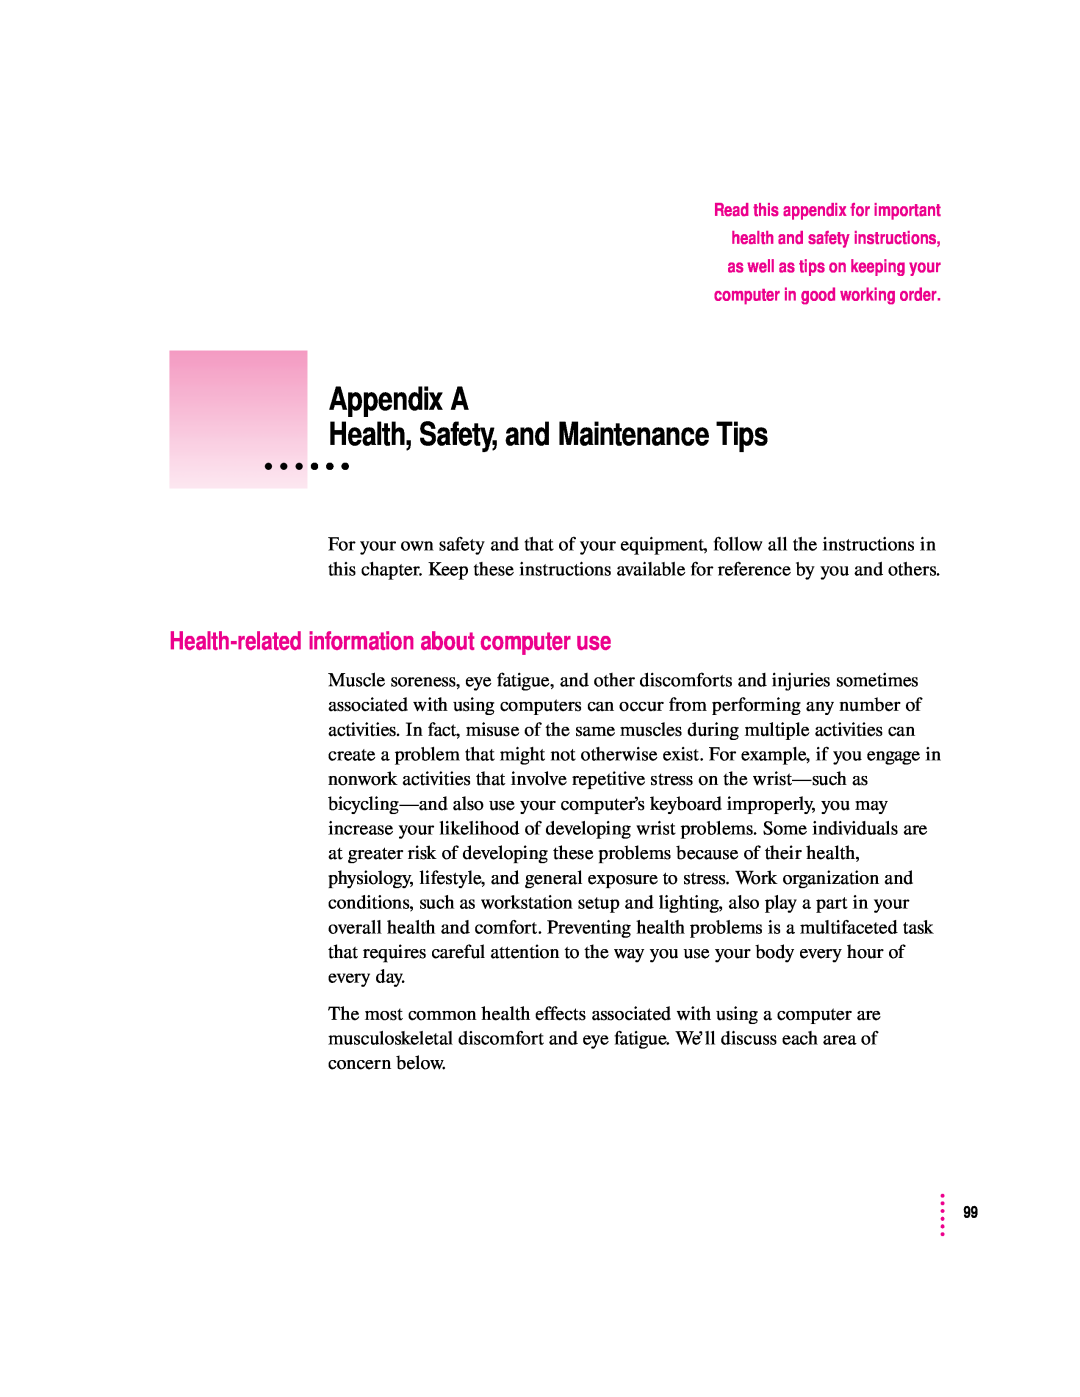 Apple 8100 Series manual Appendix A Health, Safety, and Maintenance Tips, Health-related information about computer use 